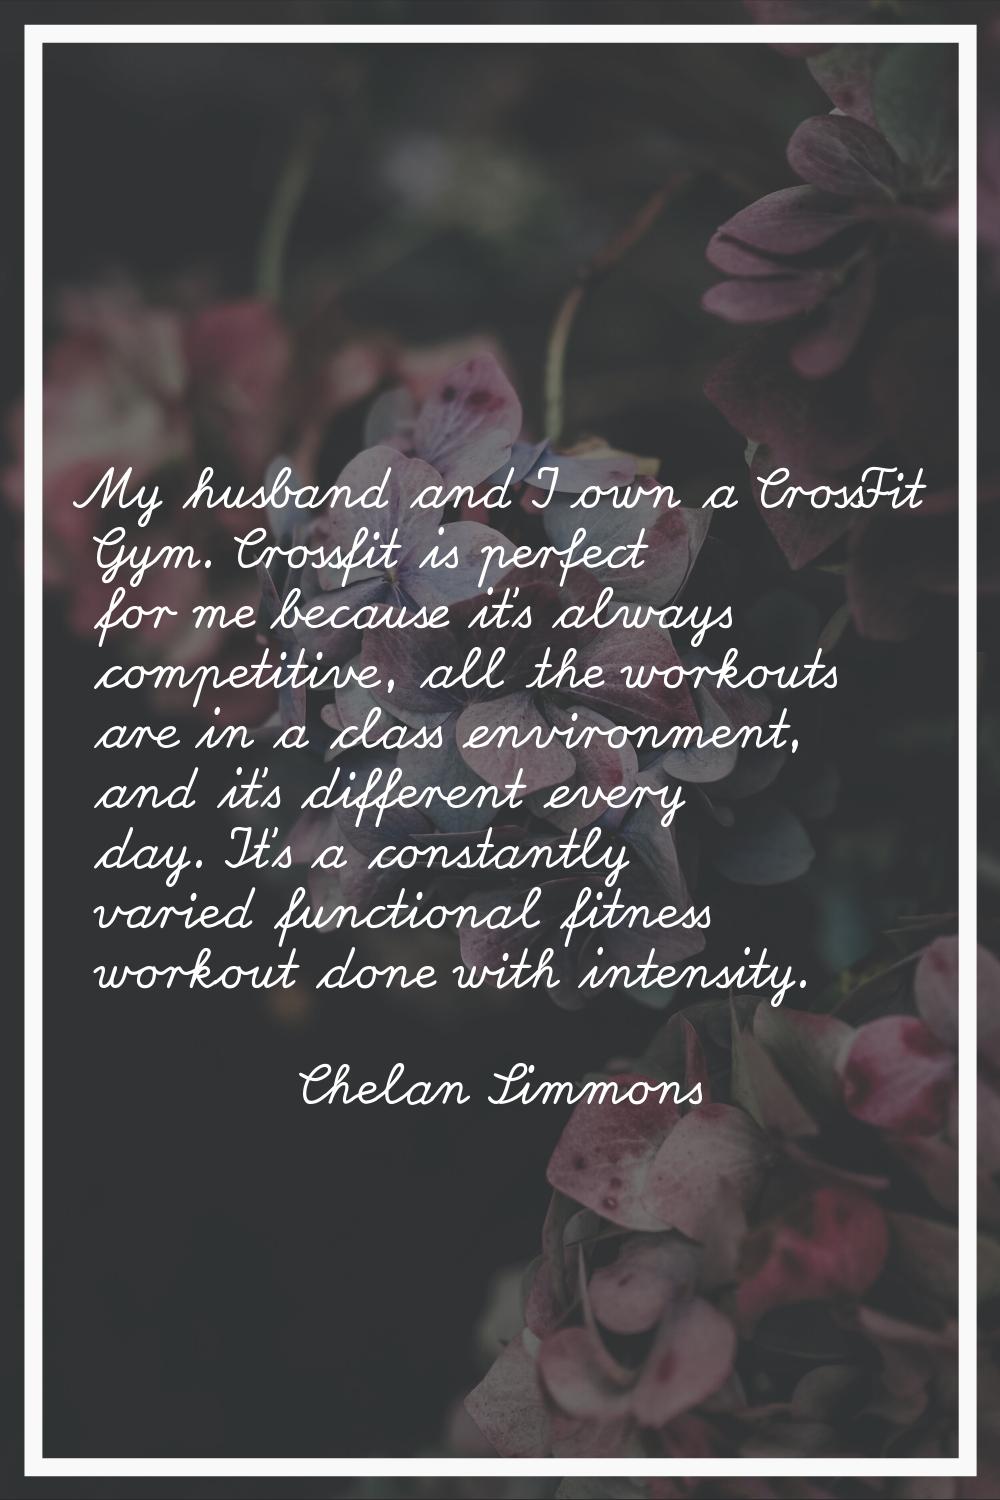 My husband and I own a CrossFit Gym. Crossfit is perfect for me because it's always competitive, al